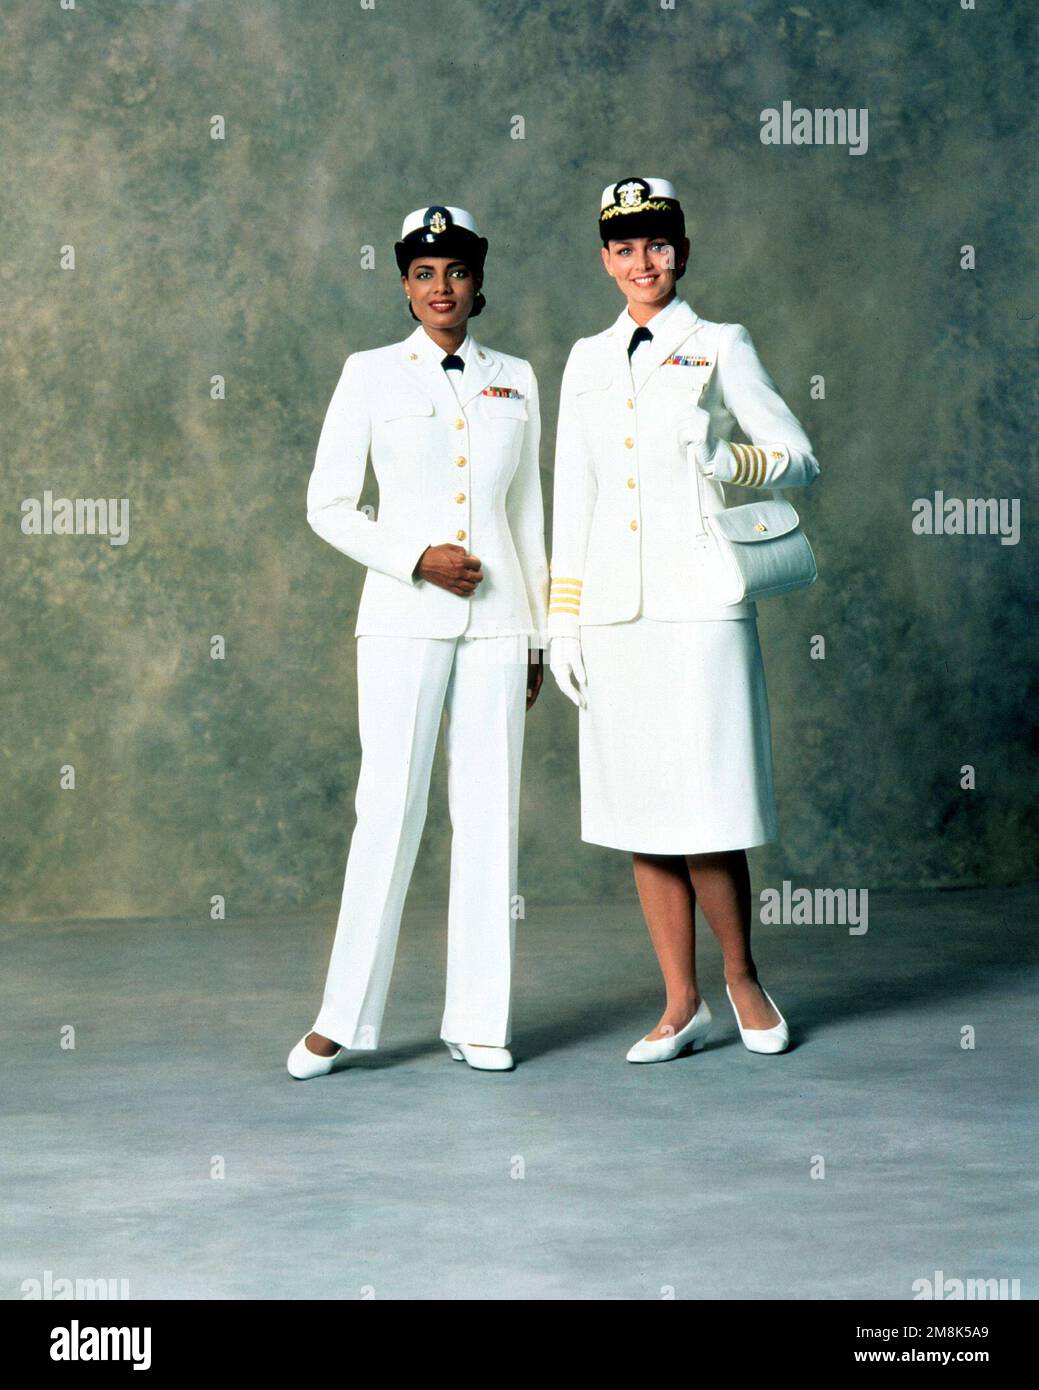 Left, Service Dress White uniform with slacks for women CHIEF PETTY  Officers. Right, Service Dress White uniform for women officers. Country:  Unknown Stock Photo - Alamy